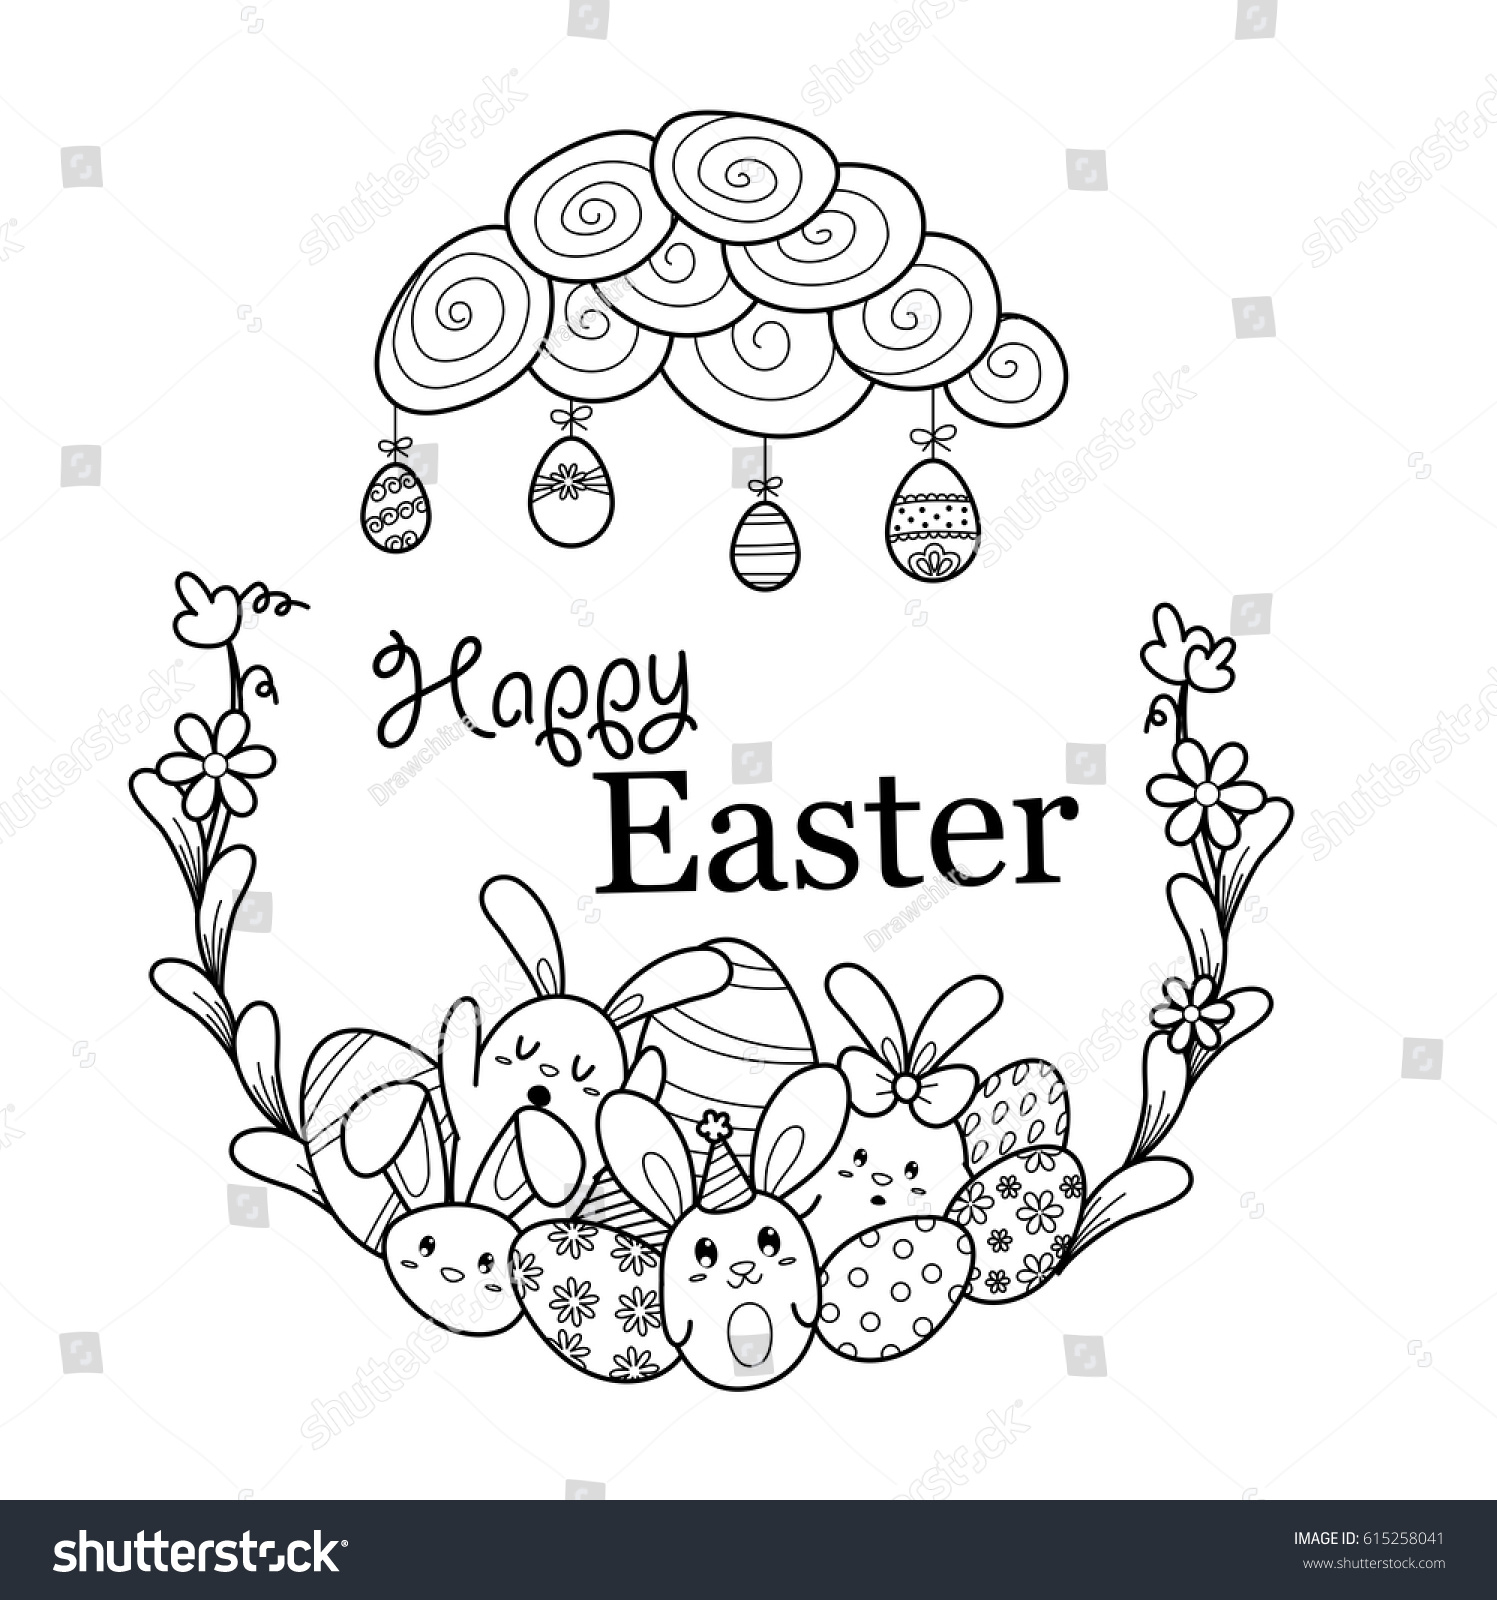 Doodle Art Easter Theme Vector Illustration Stock Vector Royalty